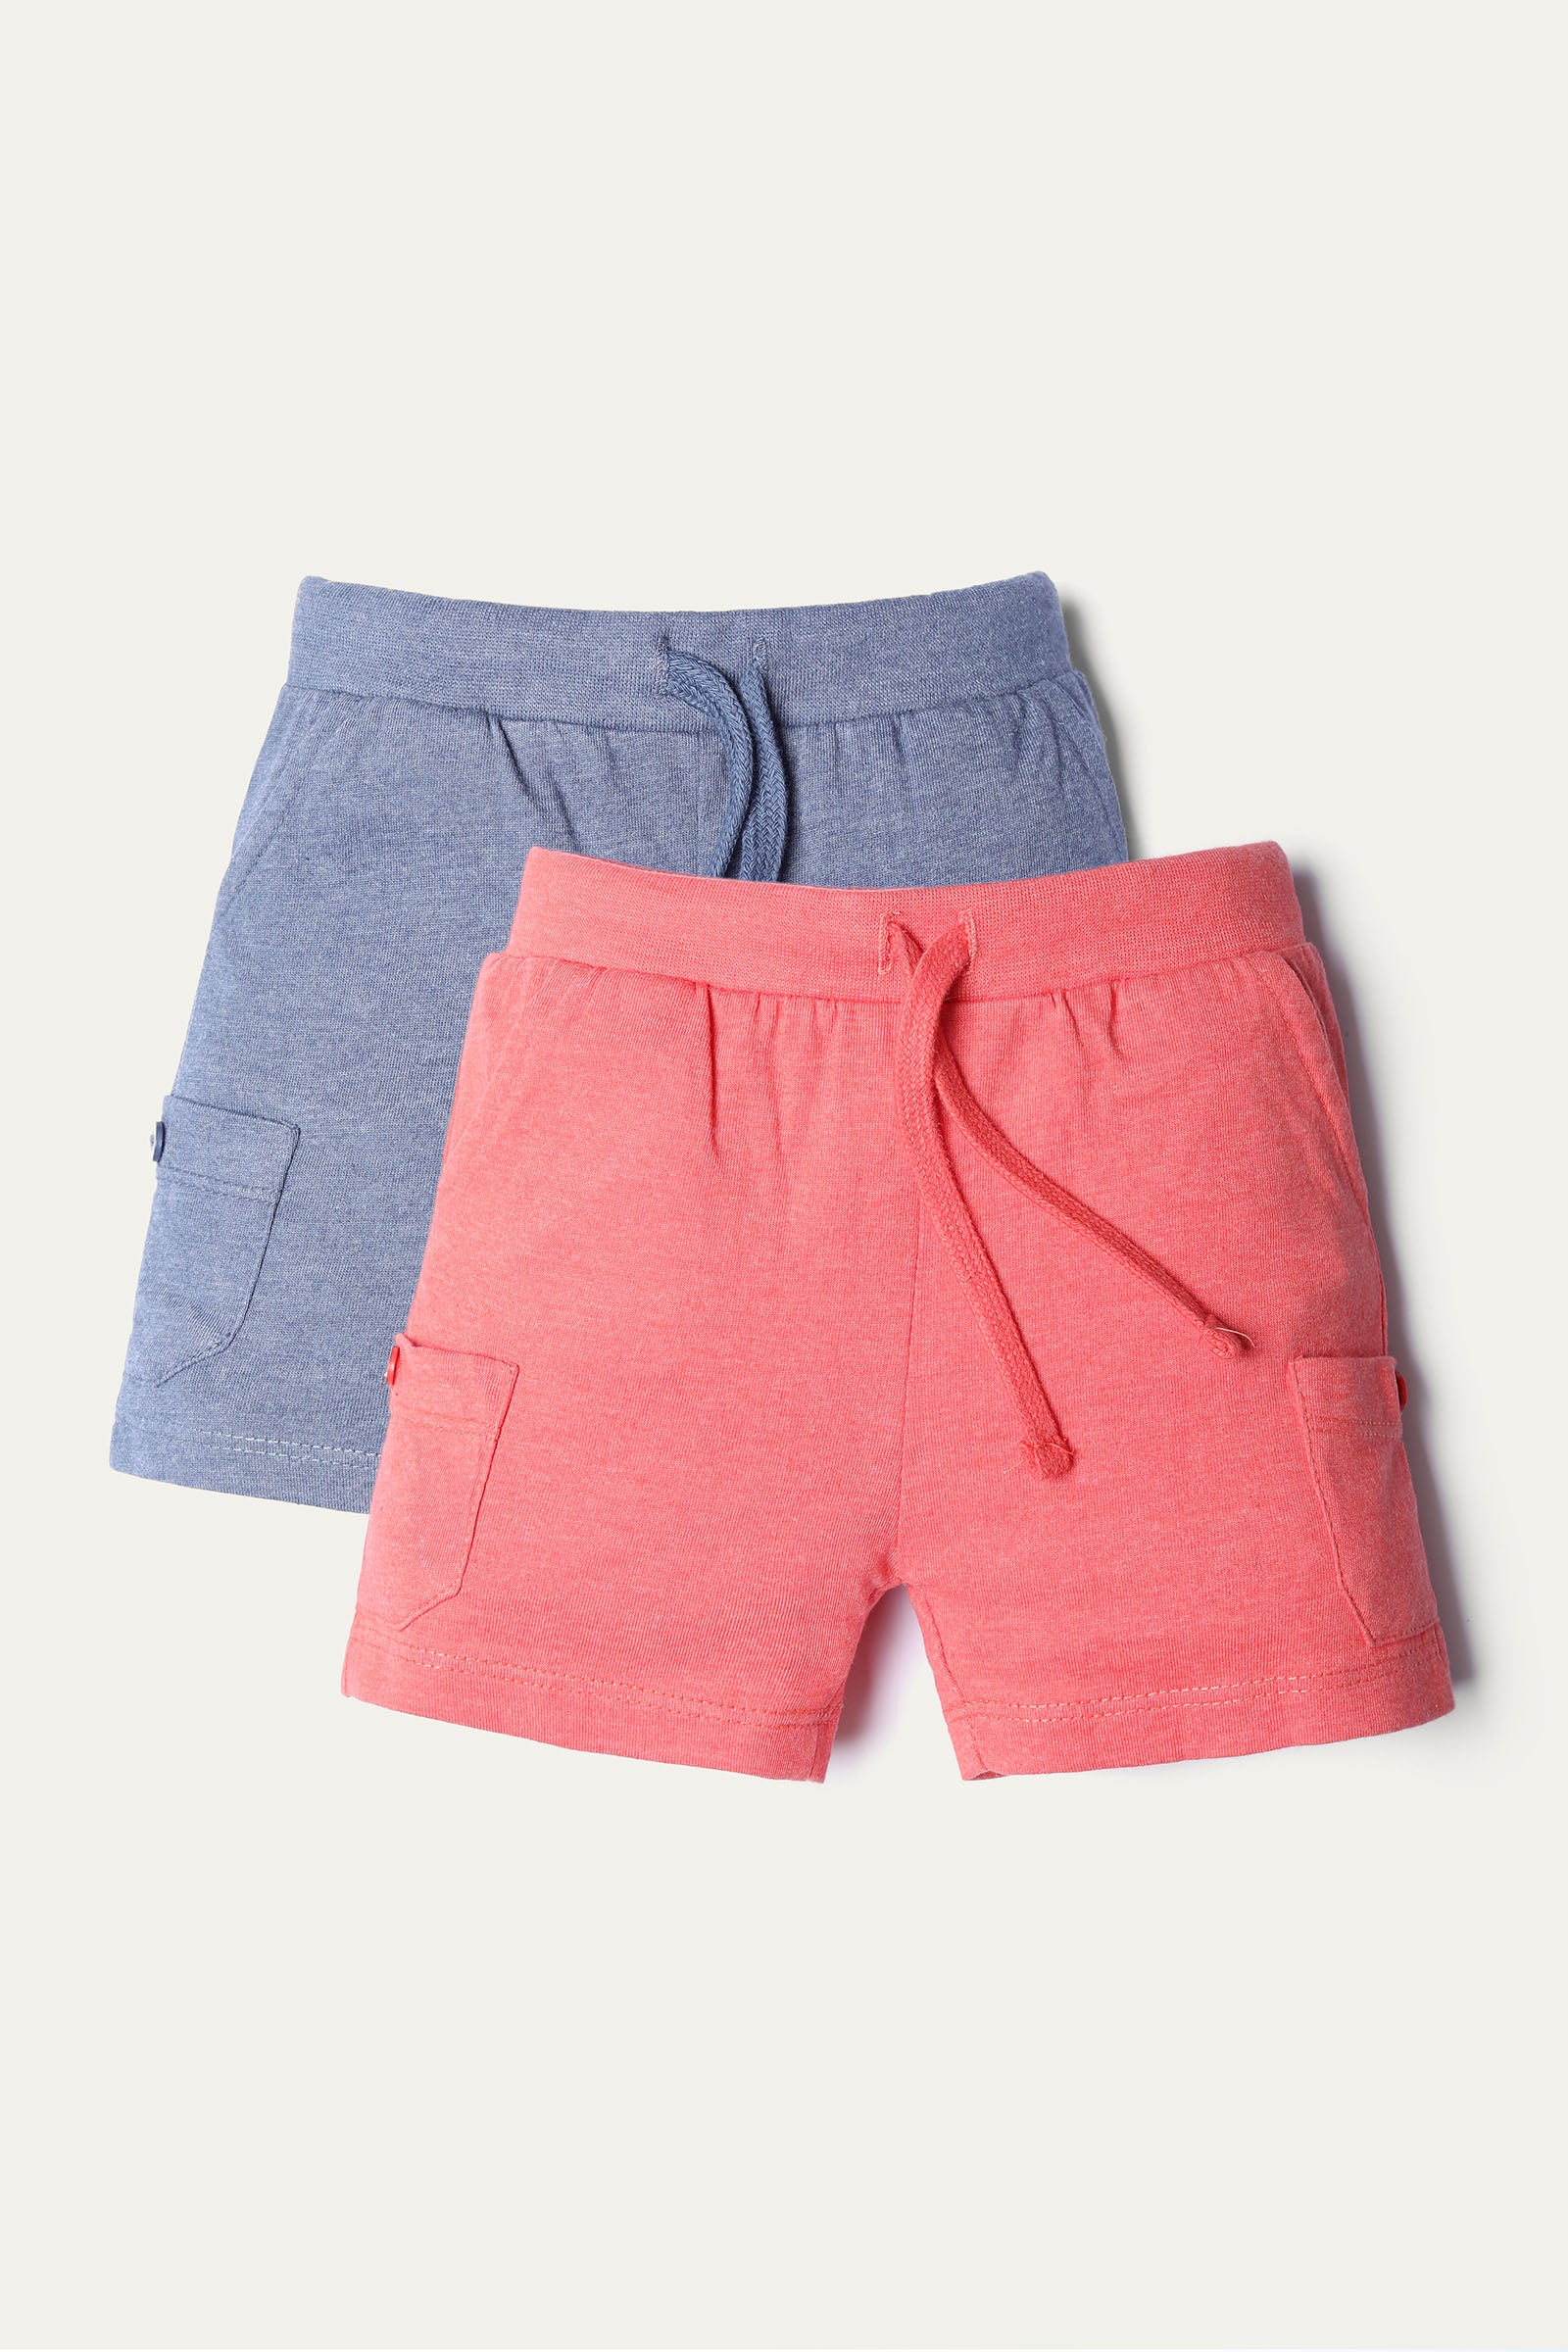 SHORTS PACK 2PC (IBSP-057)